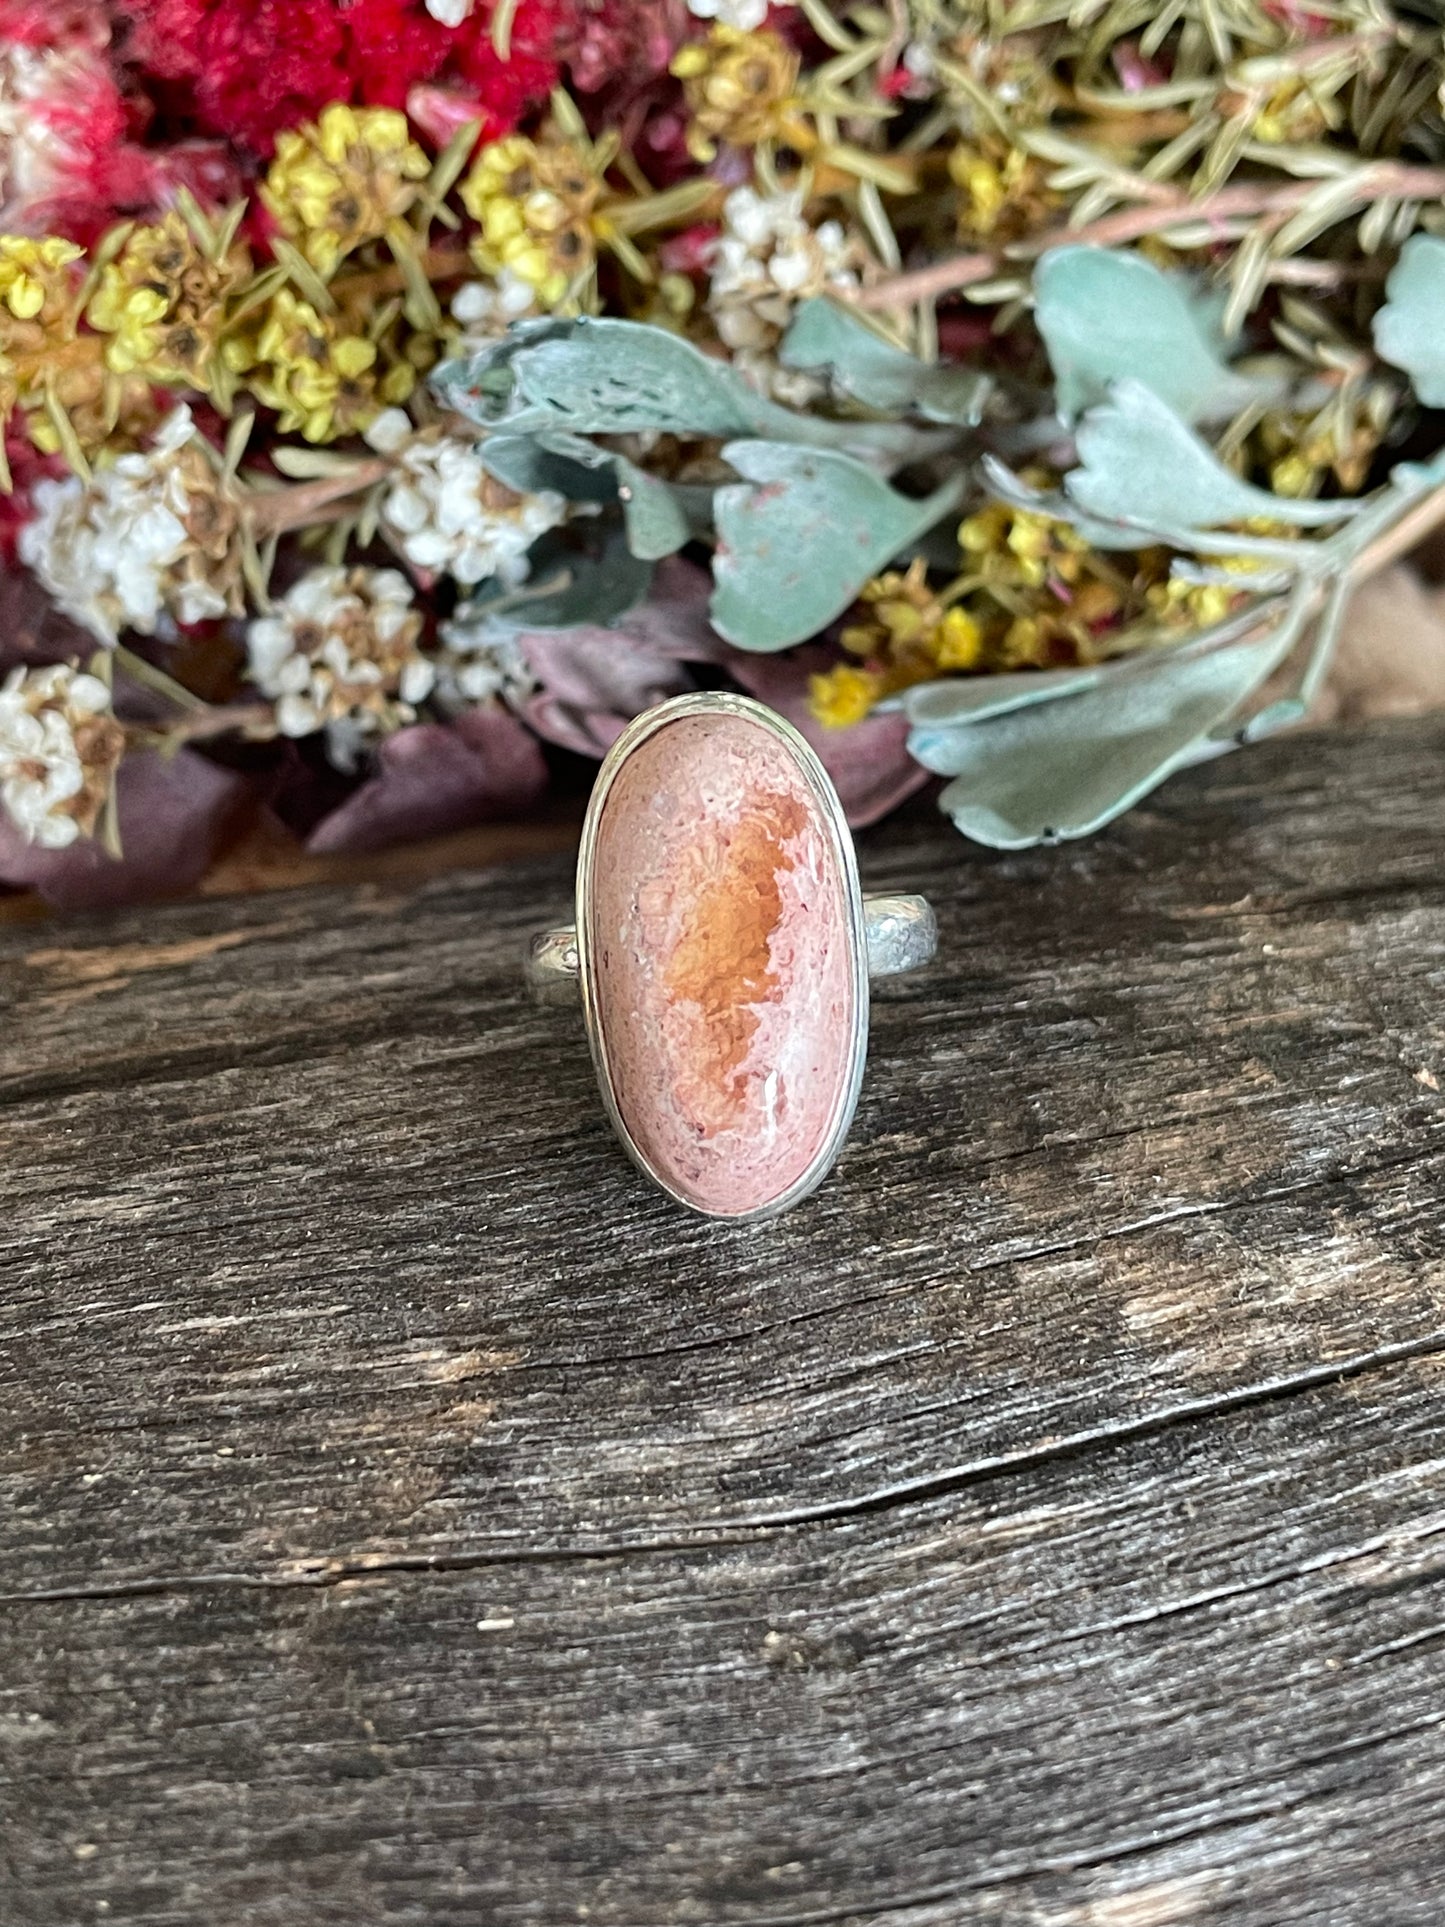 Mexican Fire Opal Silver Ring